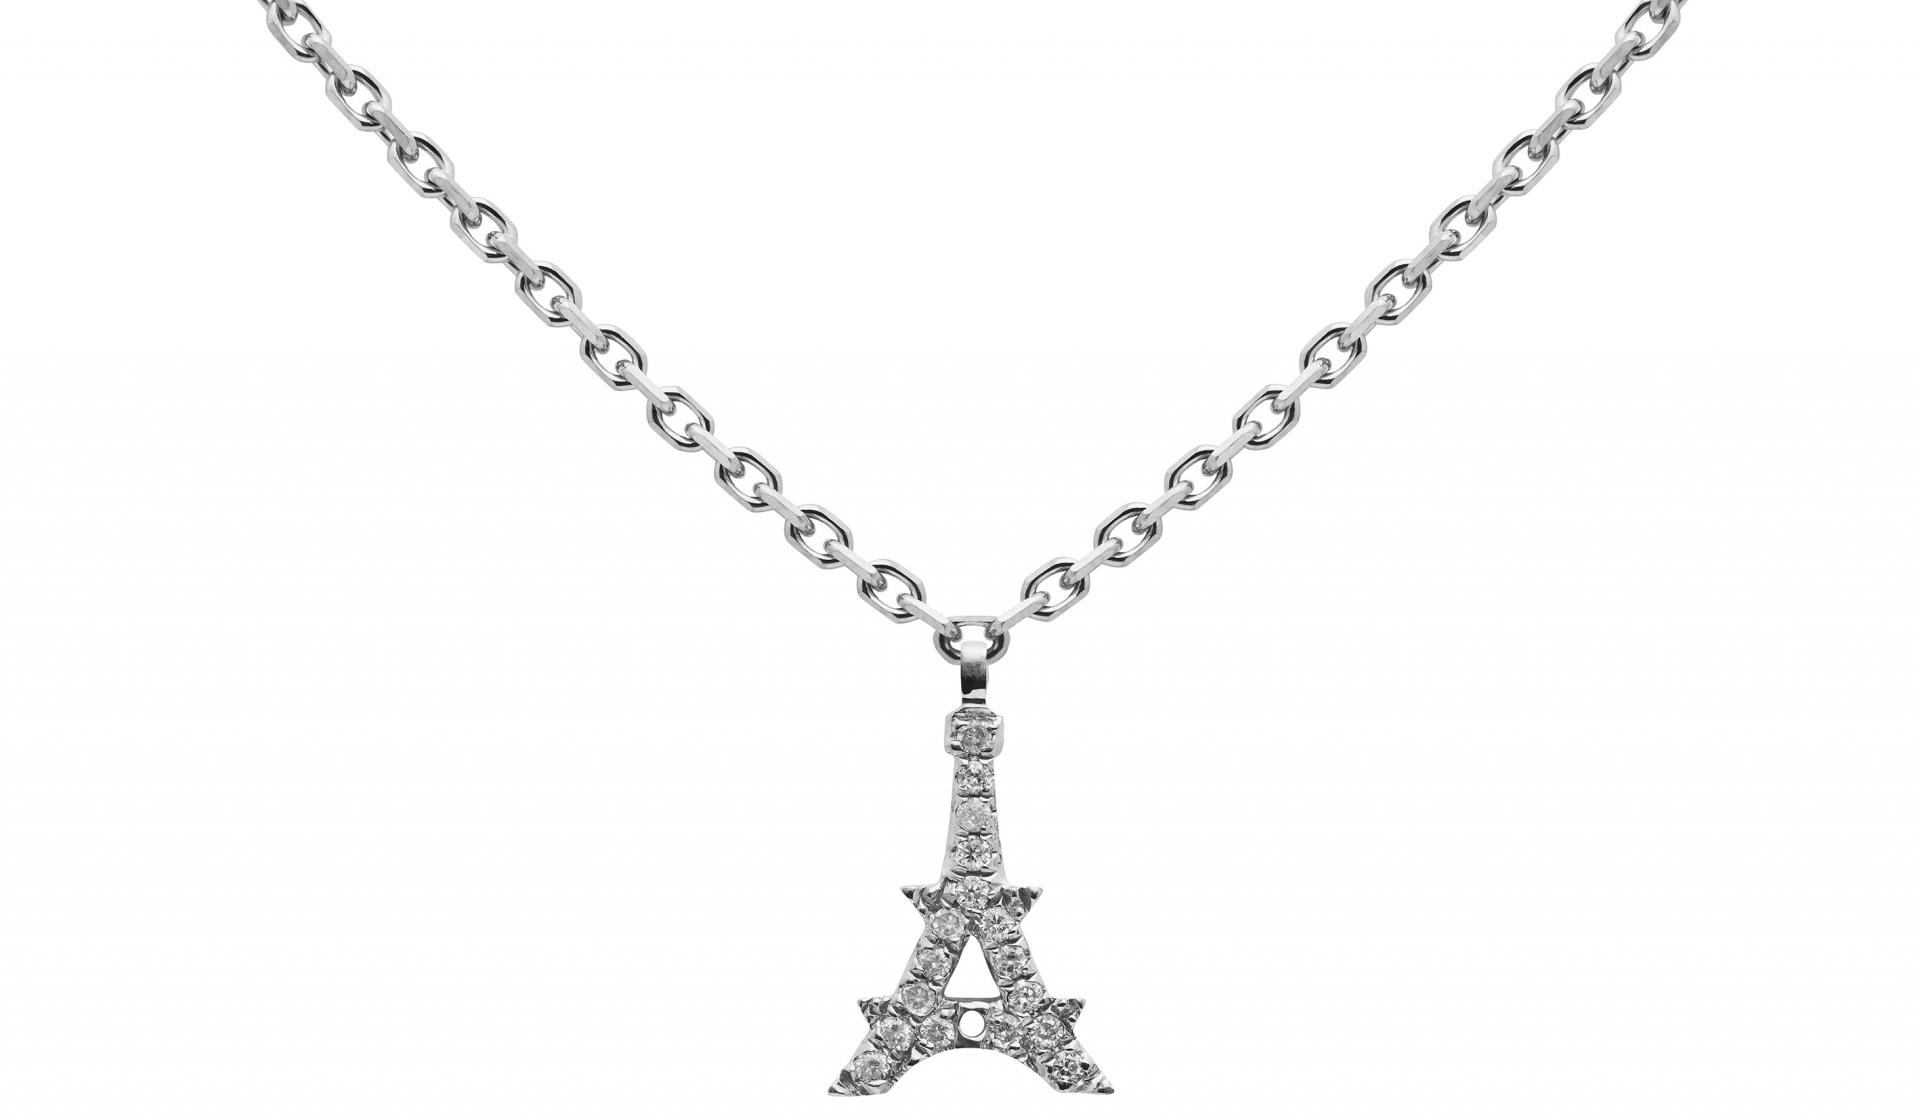 Buy Eiffel Tower Necklace 925 Sterling Silver Paris Jewelry French Jewelry  Online in India - Etsy